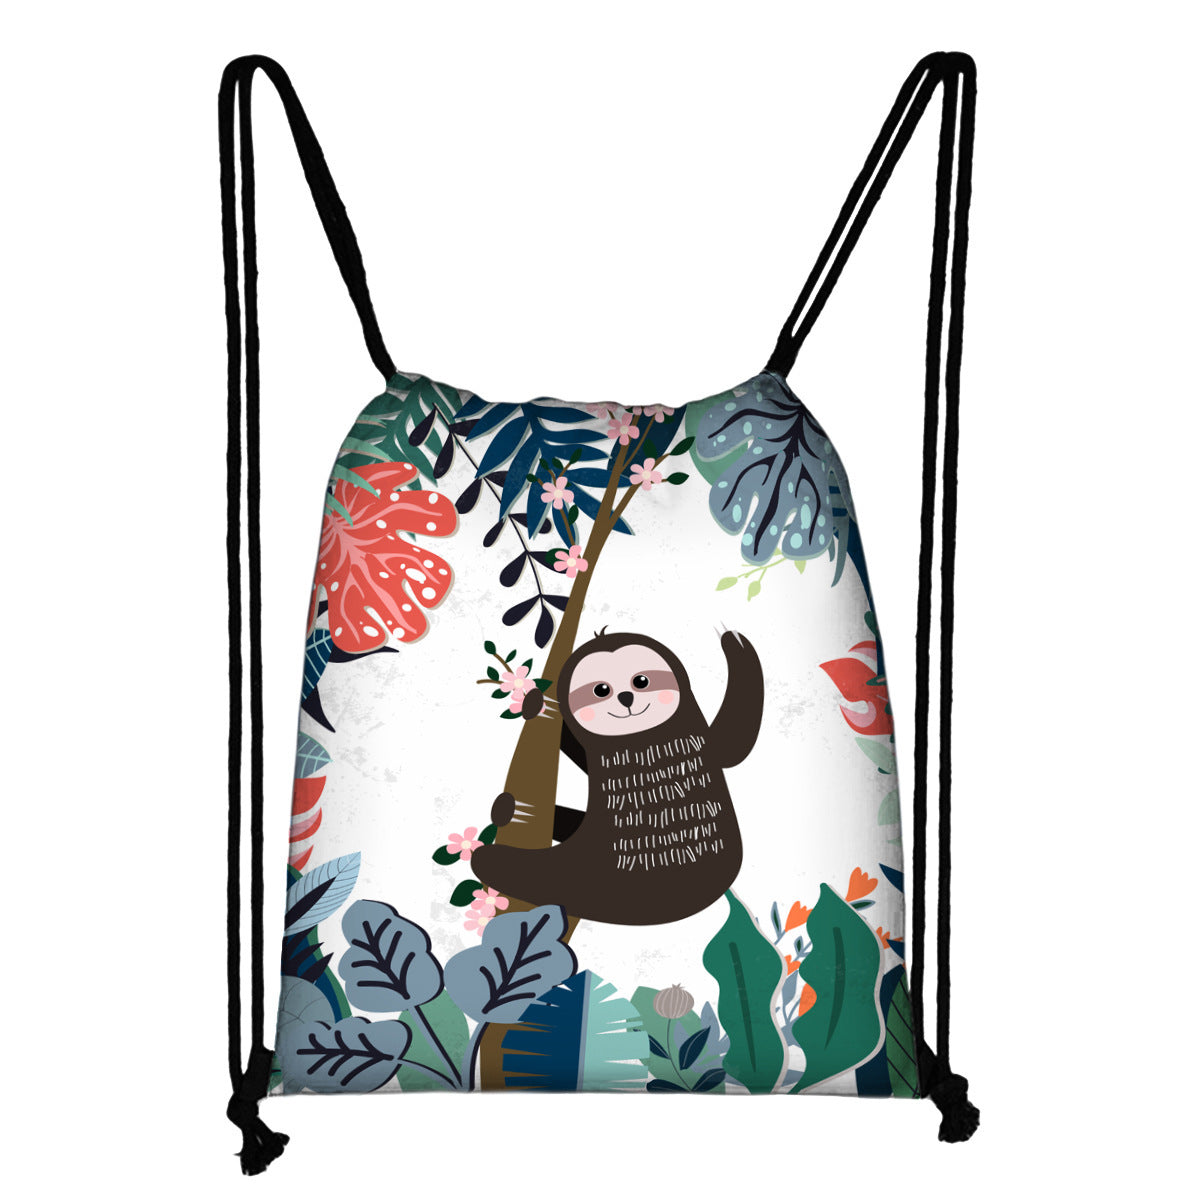 Drawstring Bag With Drawstring Mouth Polyester Backpack For Outdoor Use